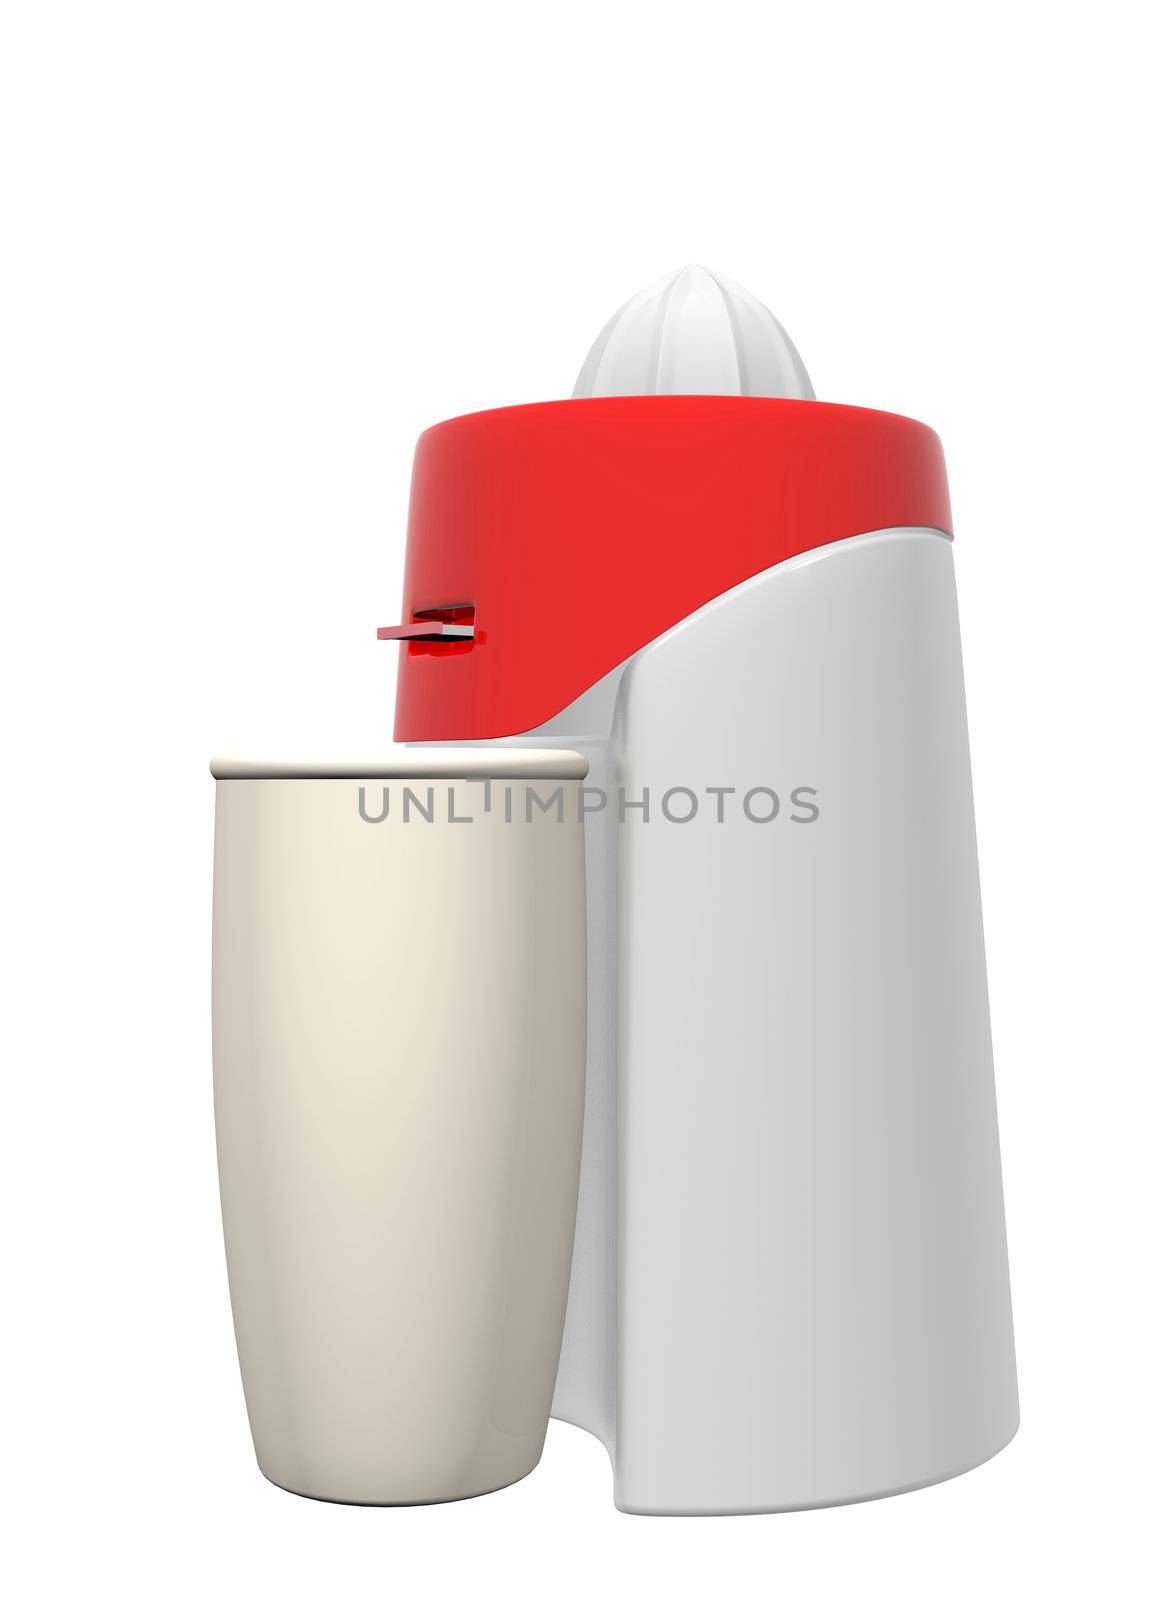 Red and white juicer and tall beige glass, 3D illustration by Morphart